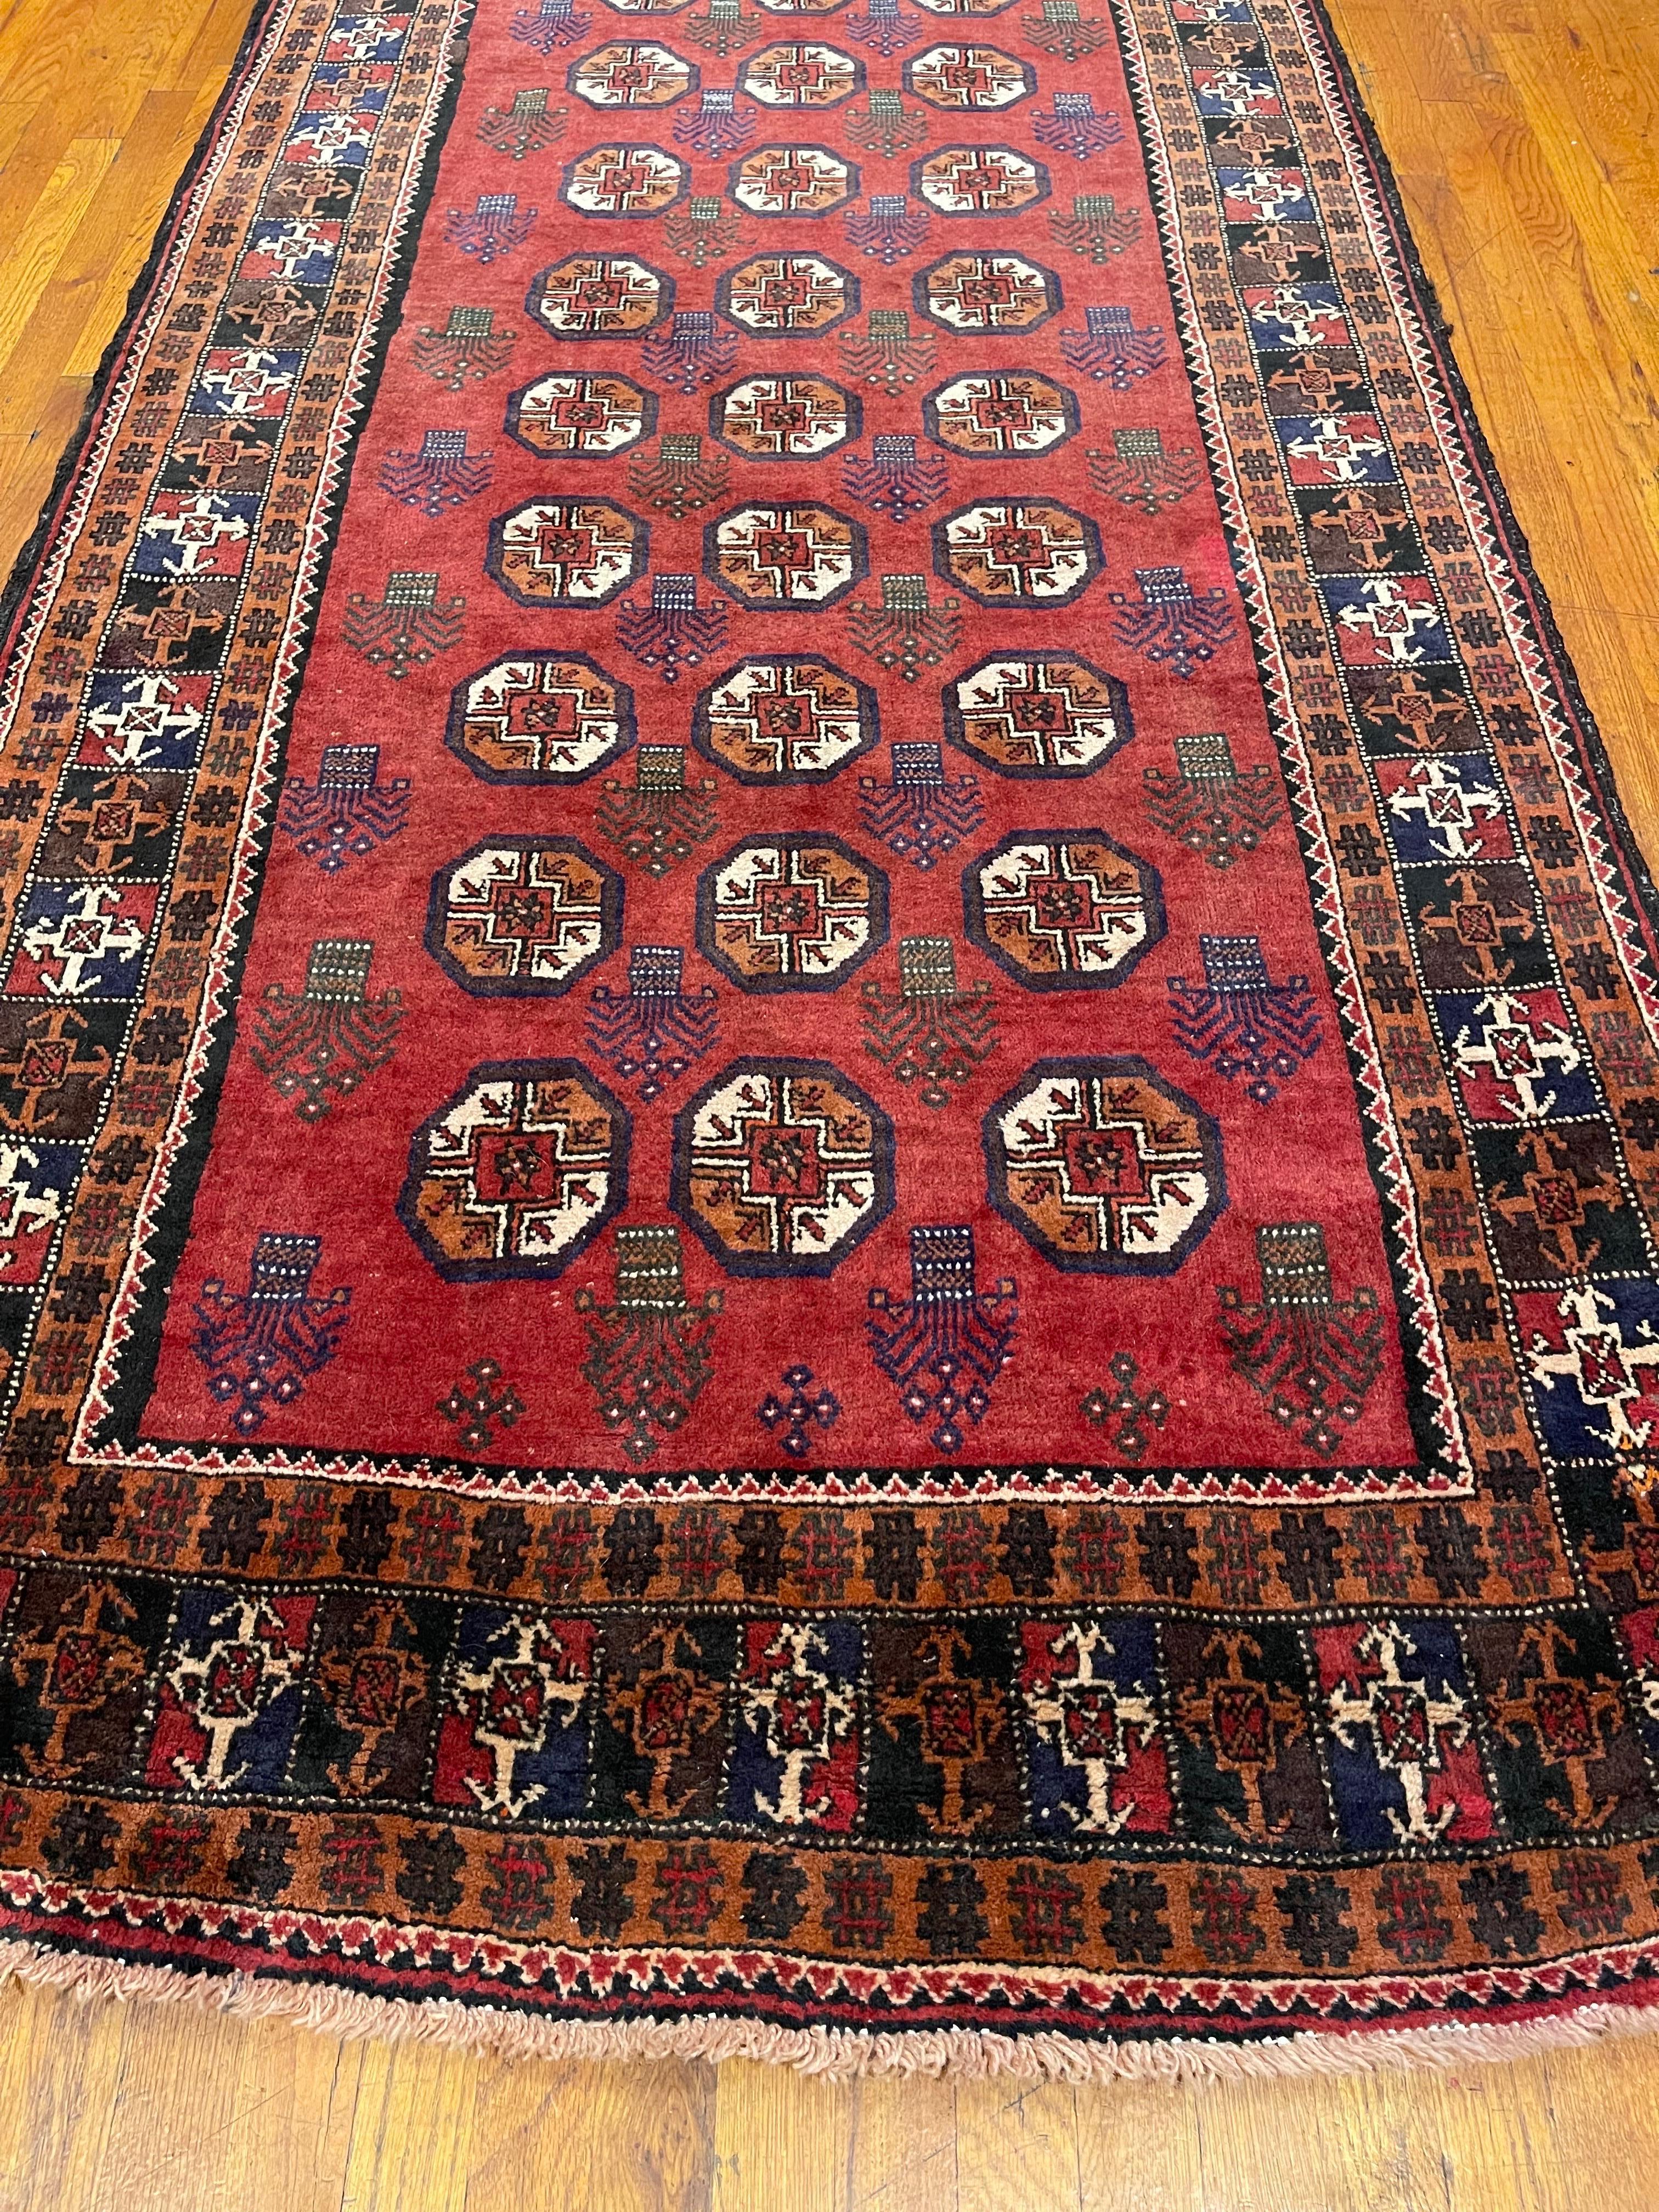 This authentic Persian Baluchi rug has wool pile and foundation which are hand-knotted by the nomads of Baluchi. The age of this rug is almost 50 years old. The base color is rust with multi shades of brown and rust in the border. The size of this